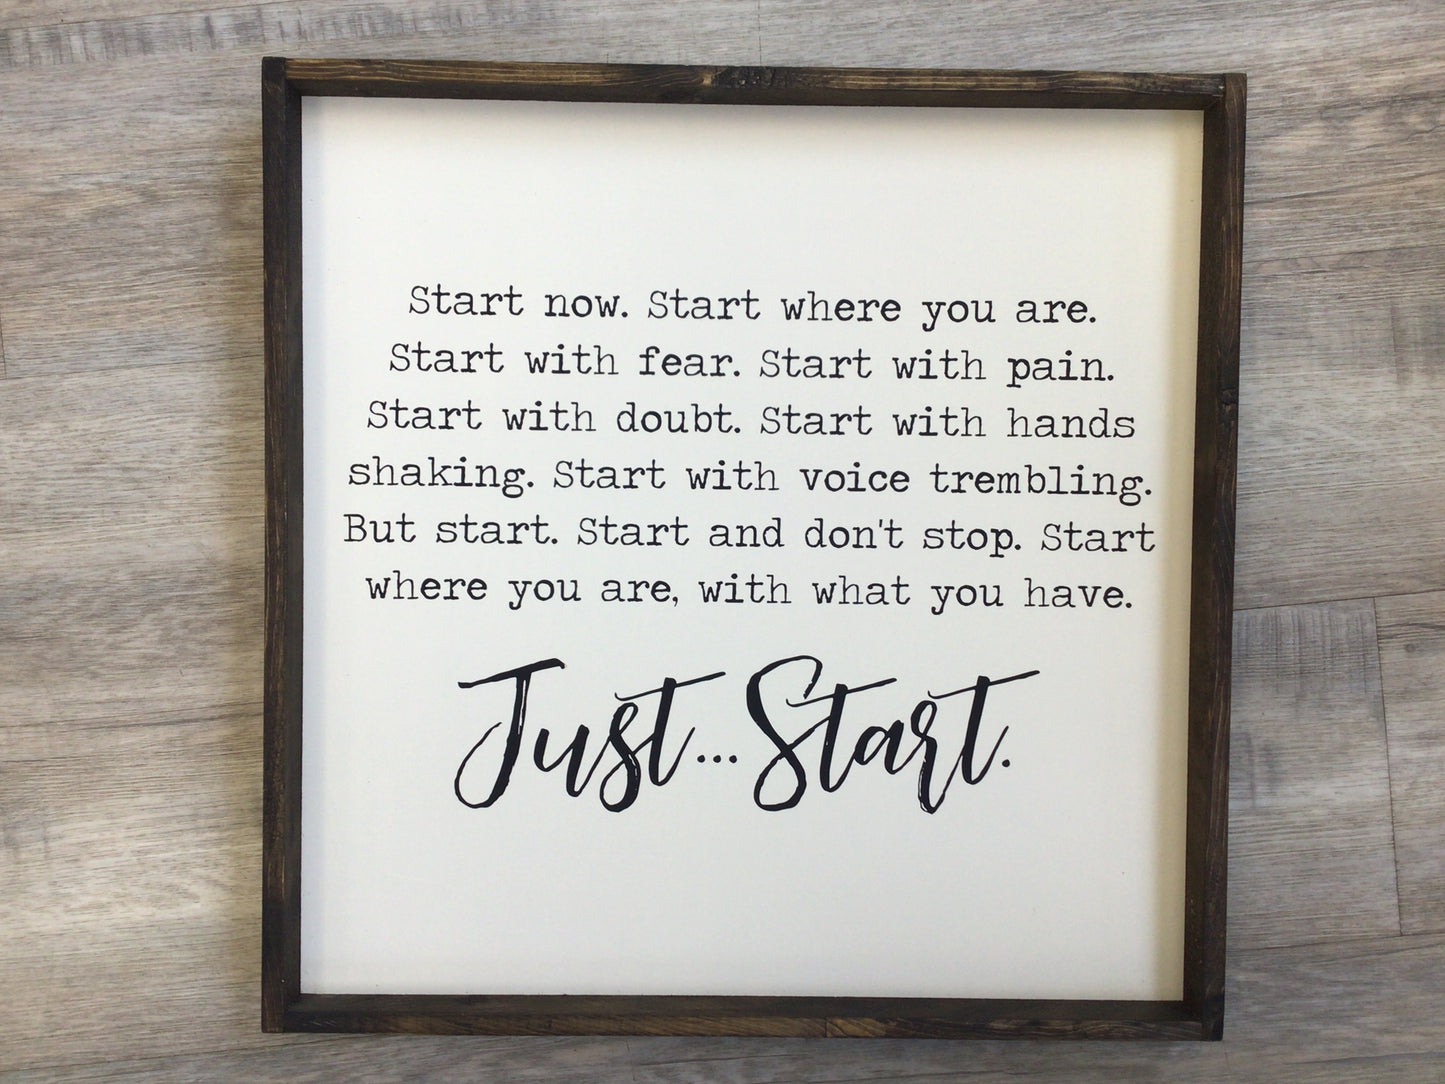 FAS-08 “Just start” Sign